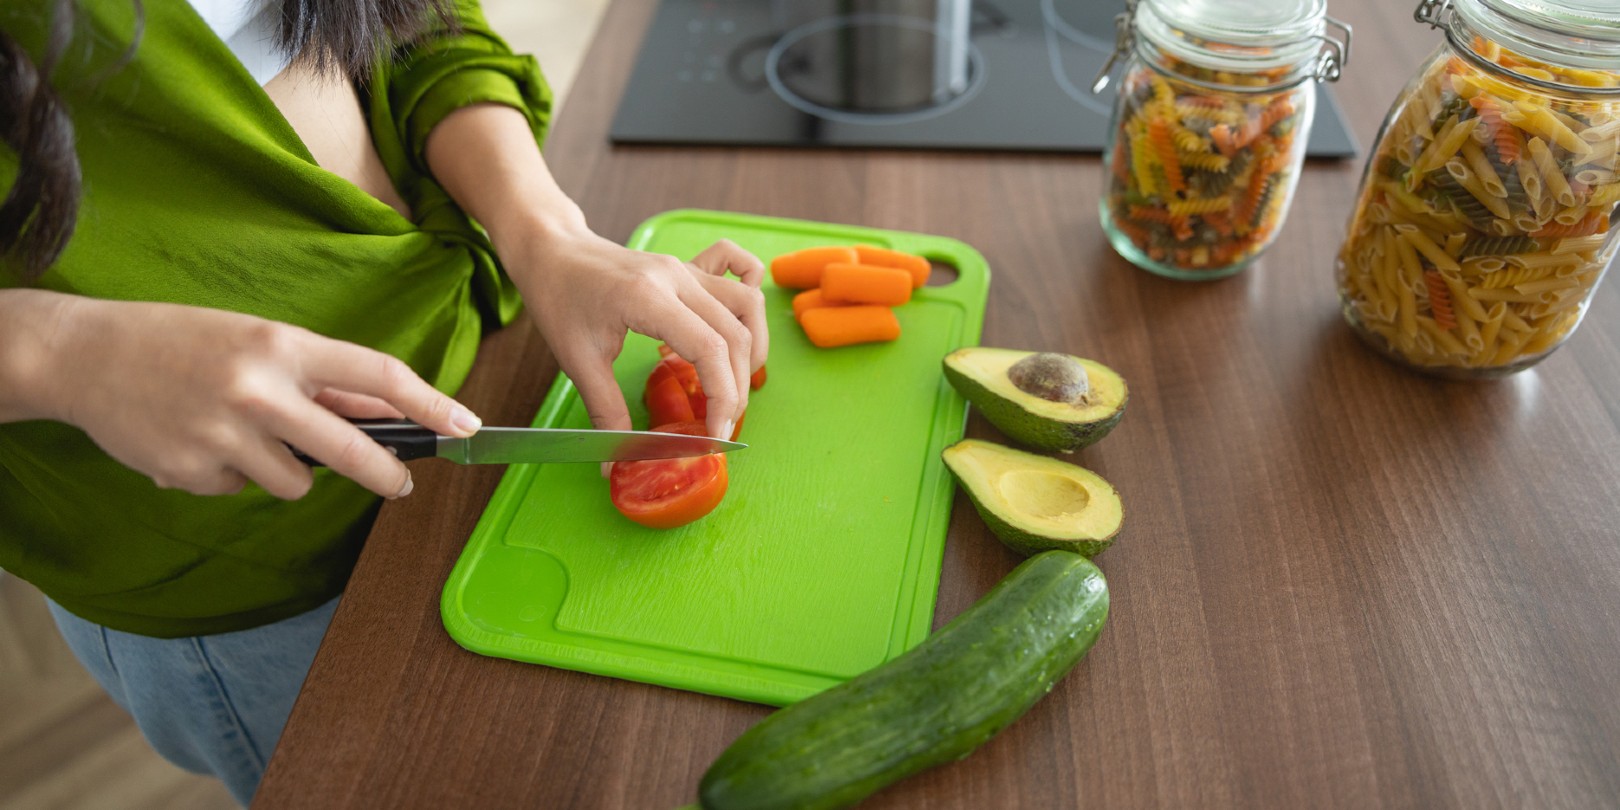 https://www.cuisineathome.com/review/wp-content/uploads/2023/04/are-plastic-cutting-boards-safe-cuisine.jpg